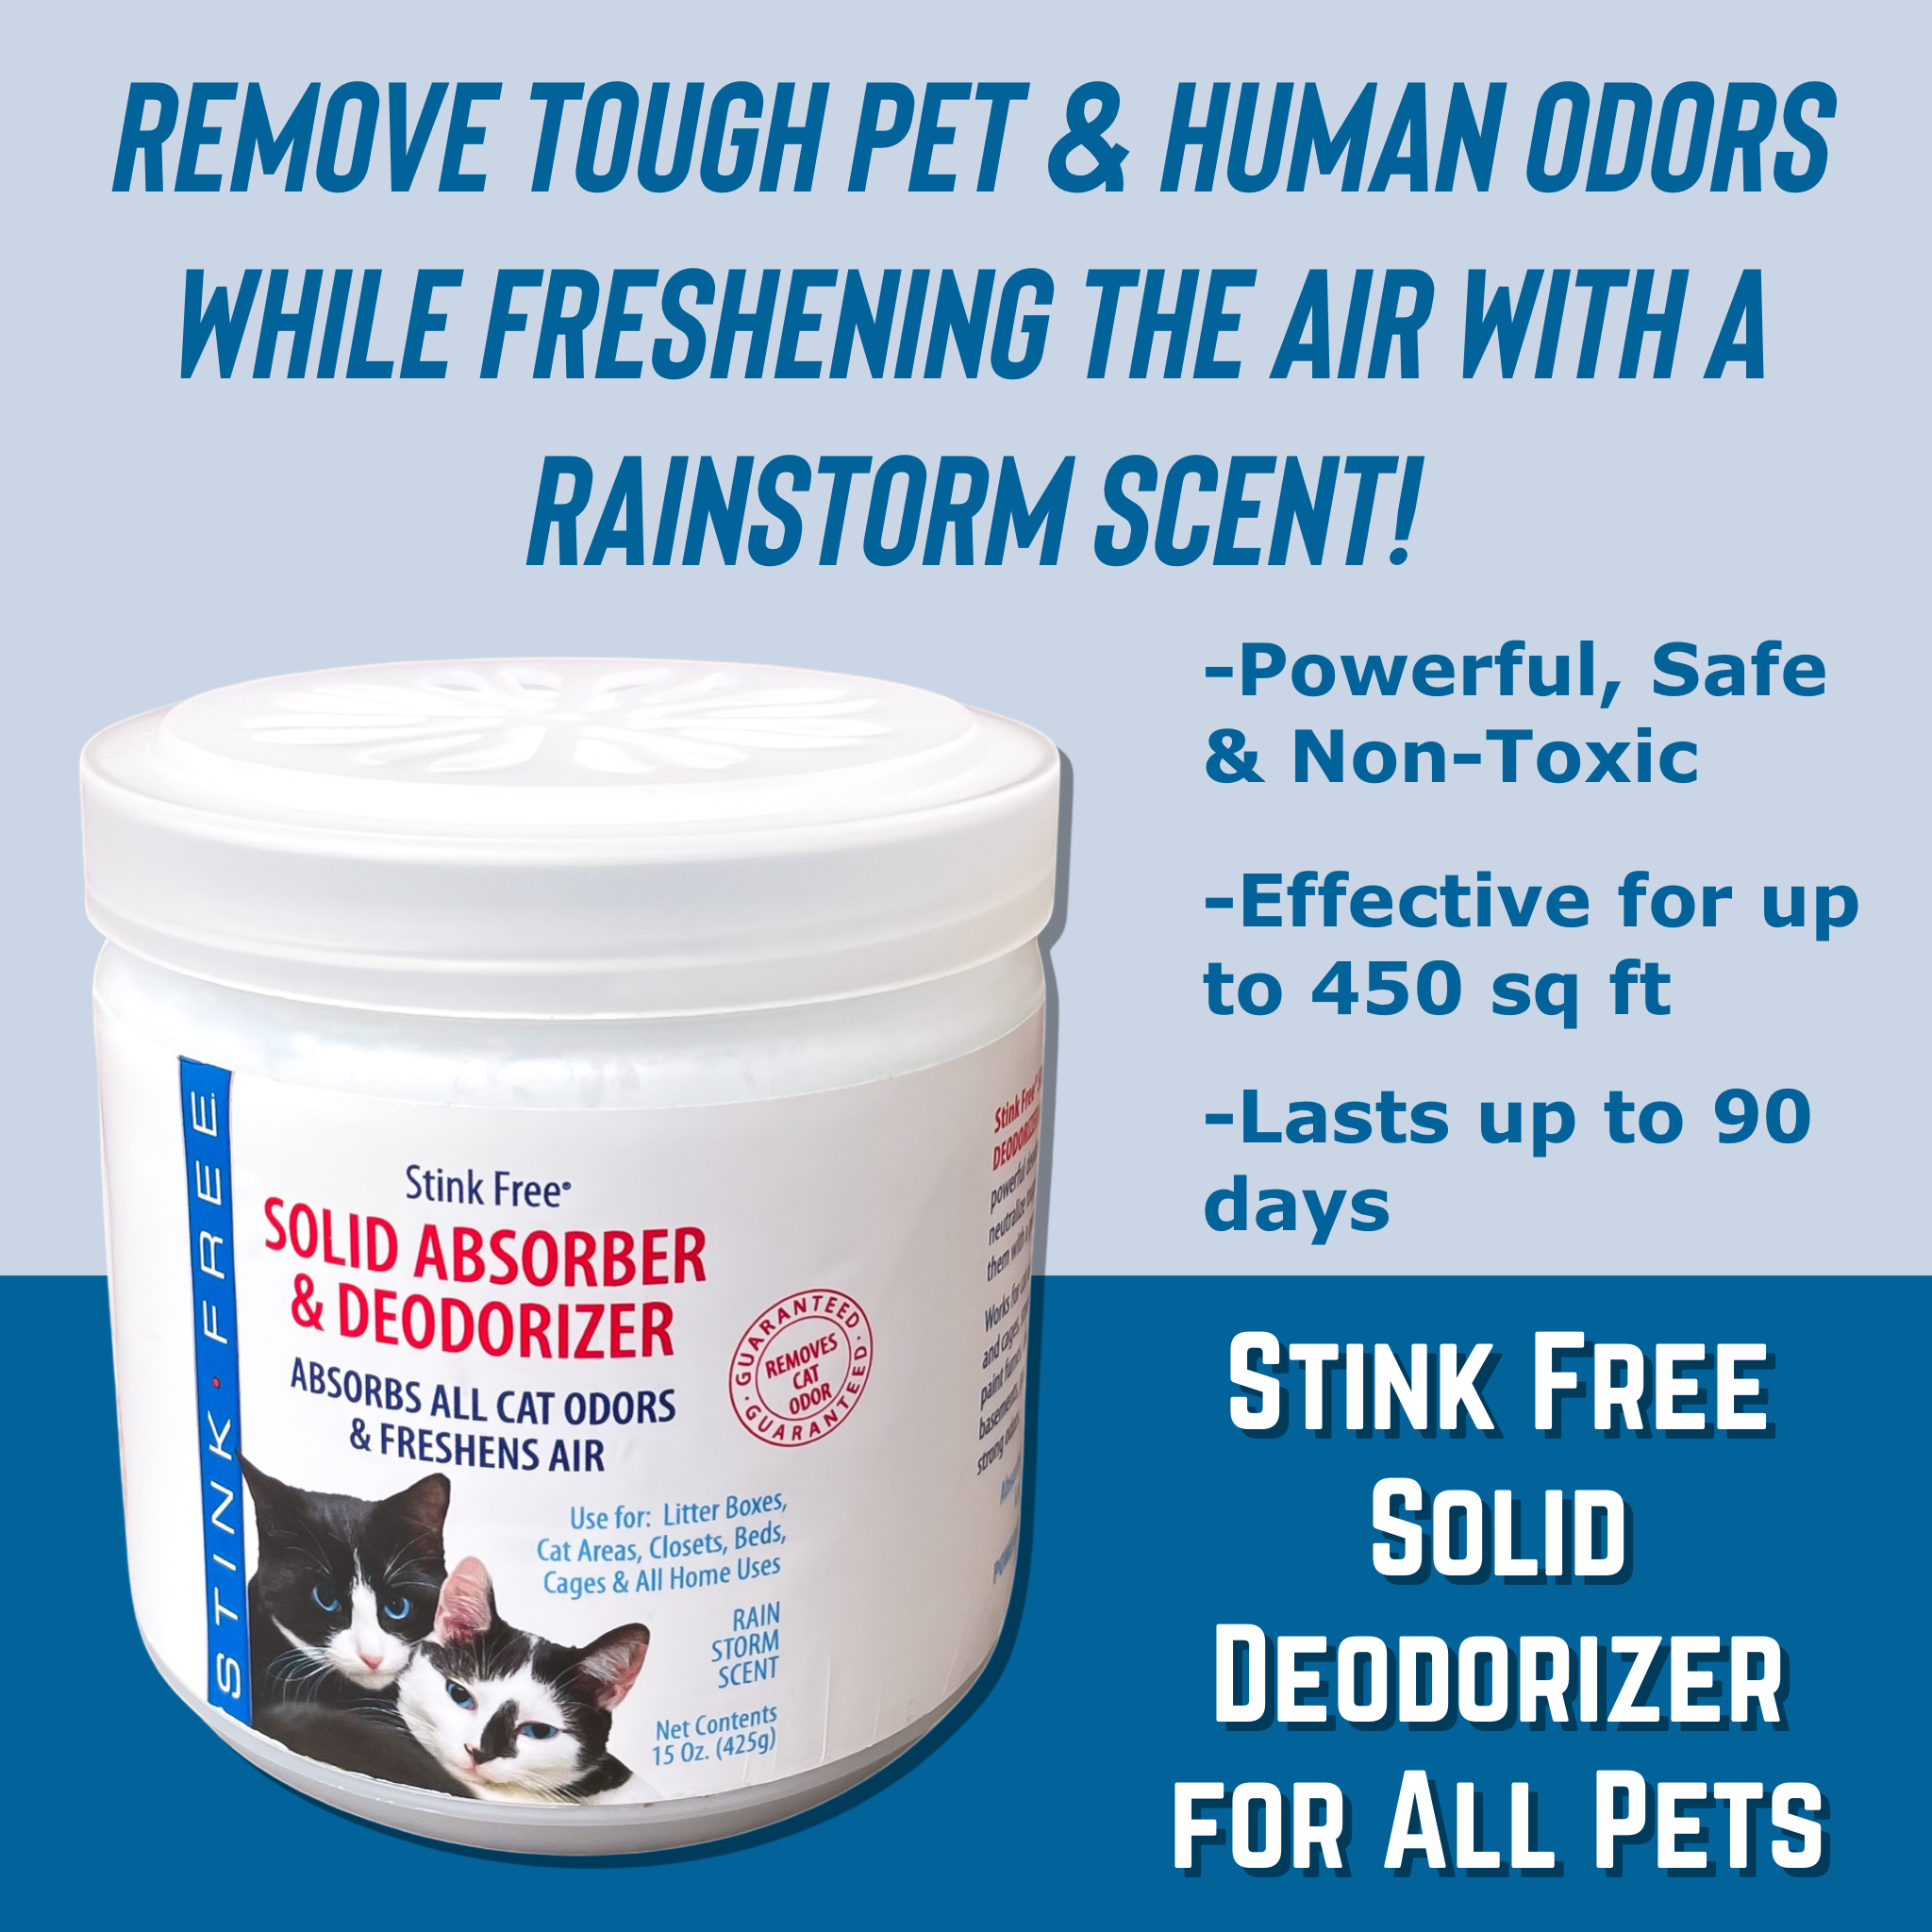 Every Cat Litter Spray & Solid Rainstorm Deodorizer for Cats